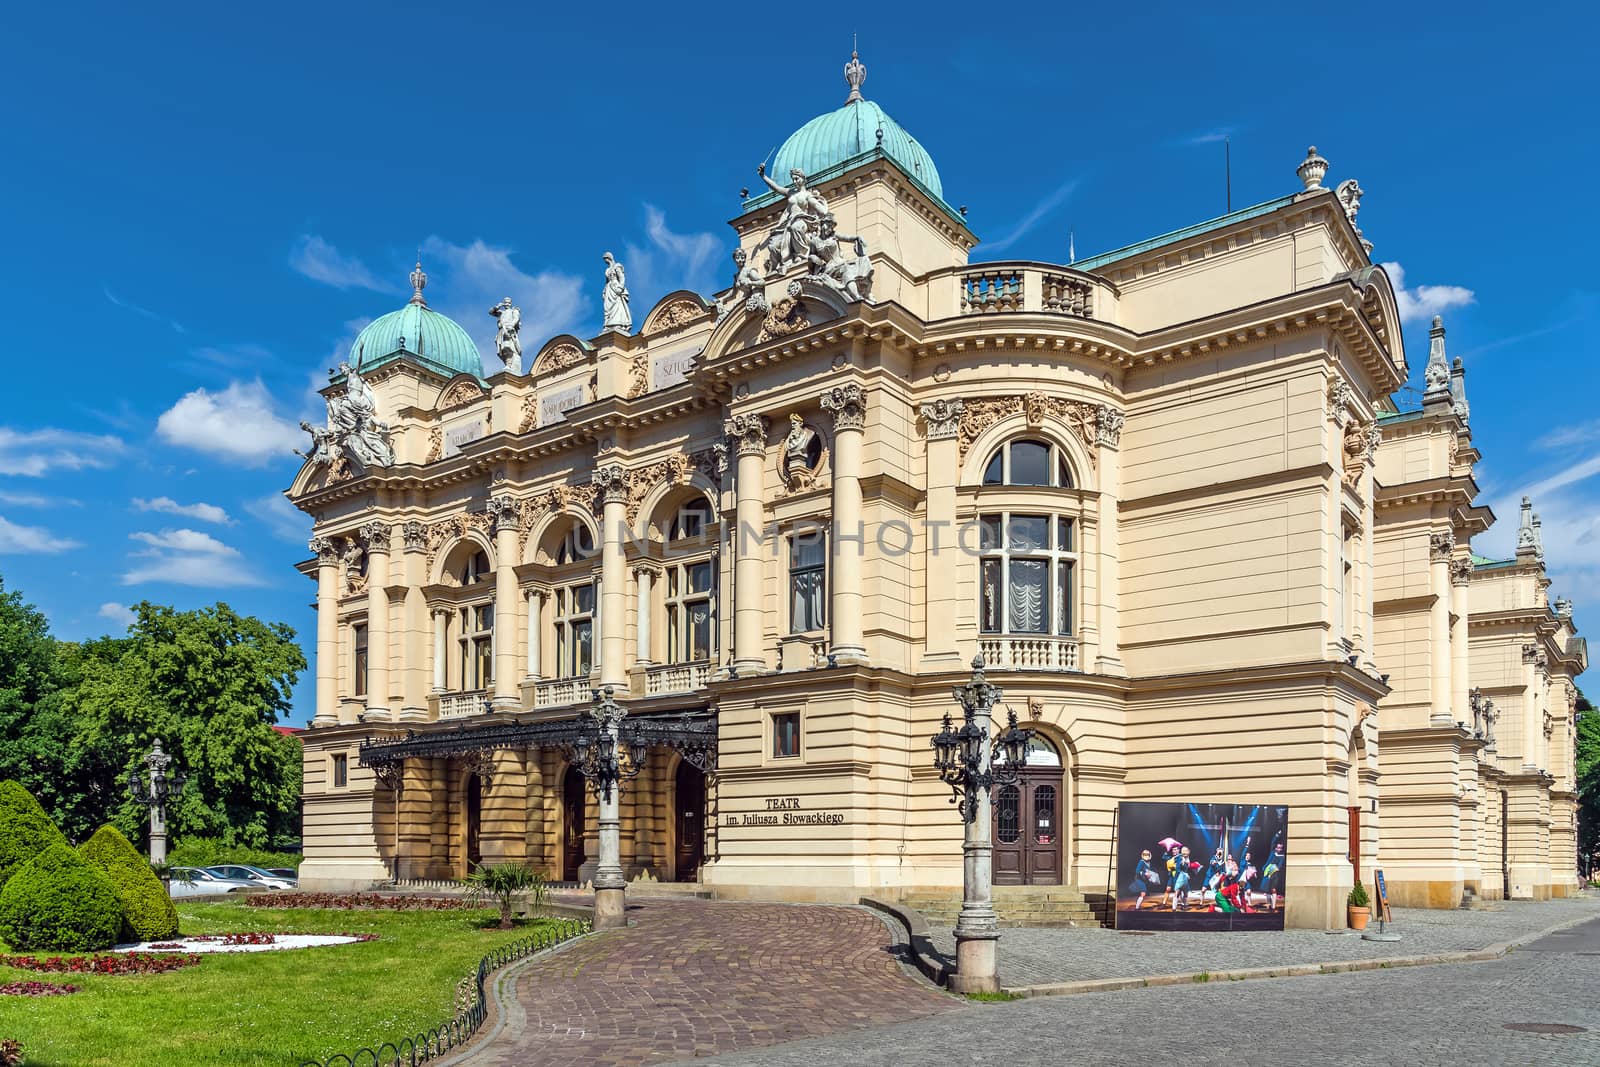 Juliusz Słowacki Theatre in Kraków founded in 1893 in a beautiful Neo-Baroque edifice. The well-known theatre is considered one of the most distinguished Polish scenes.